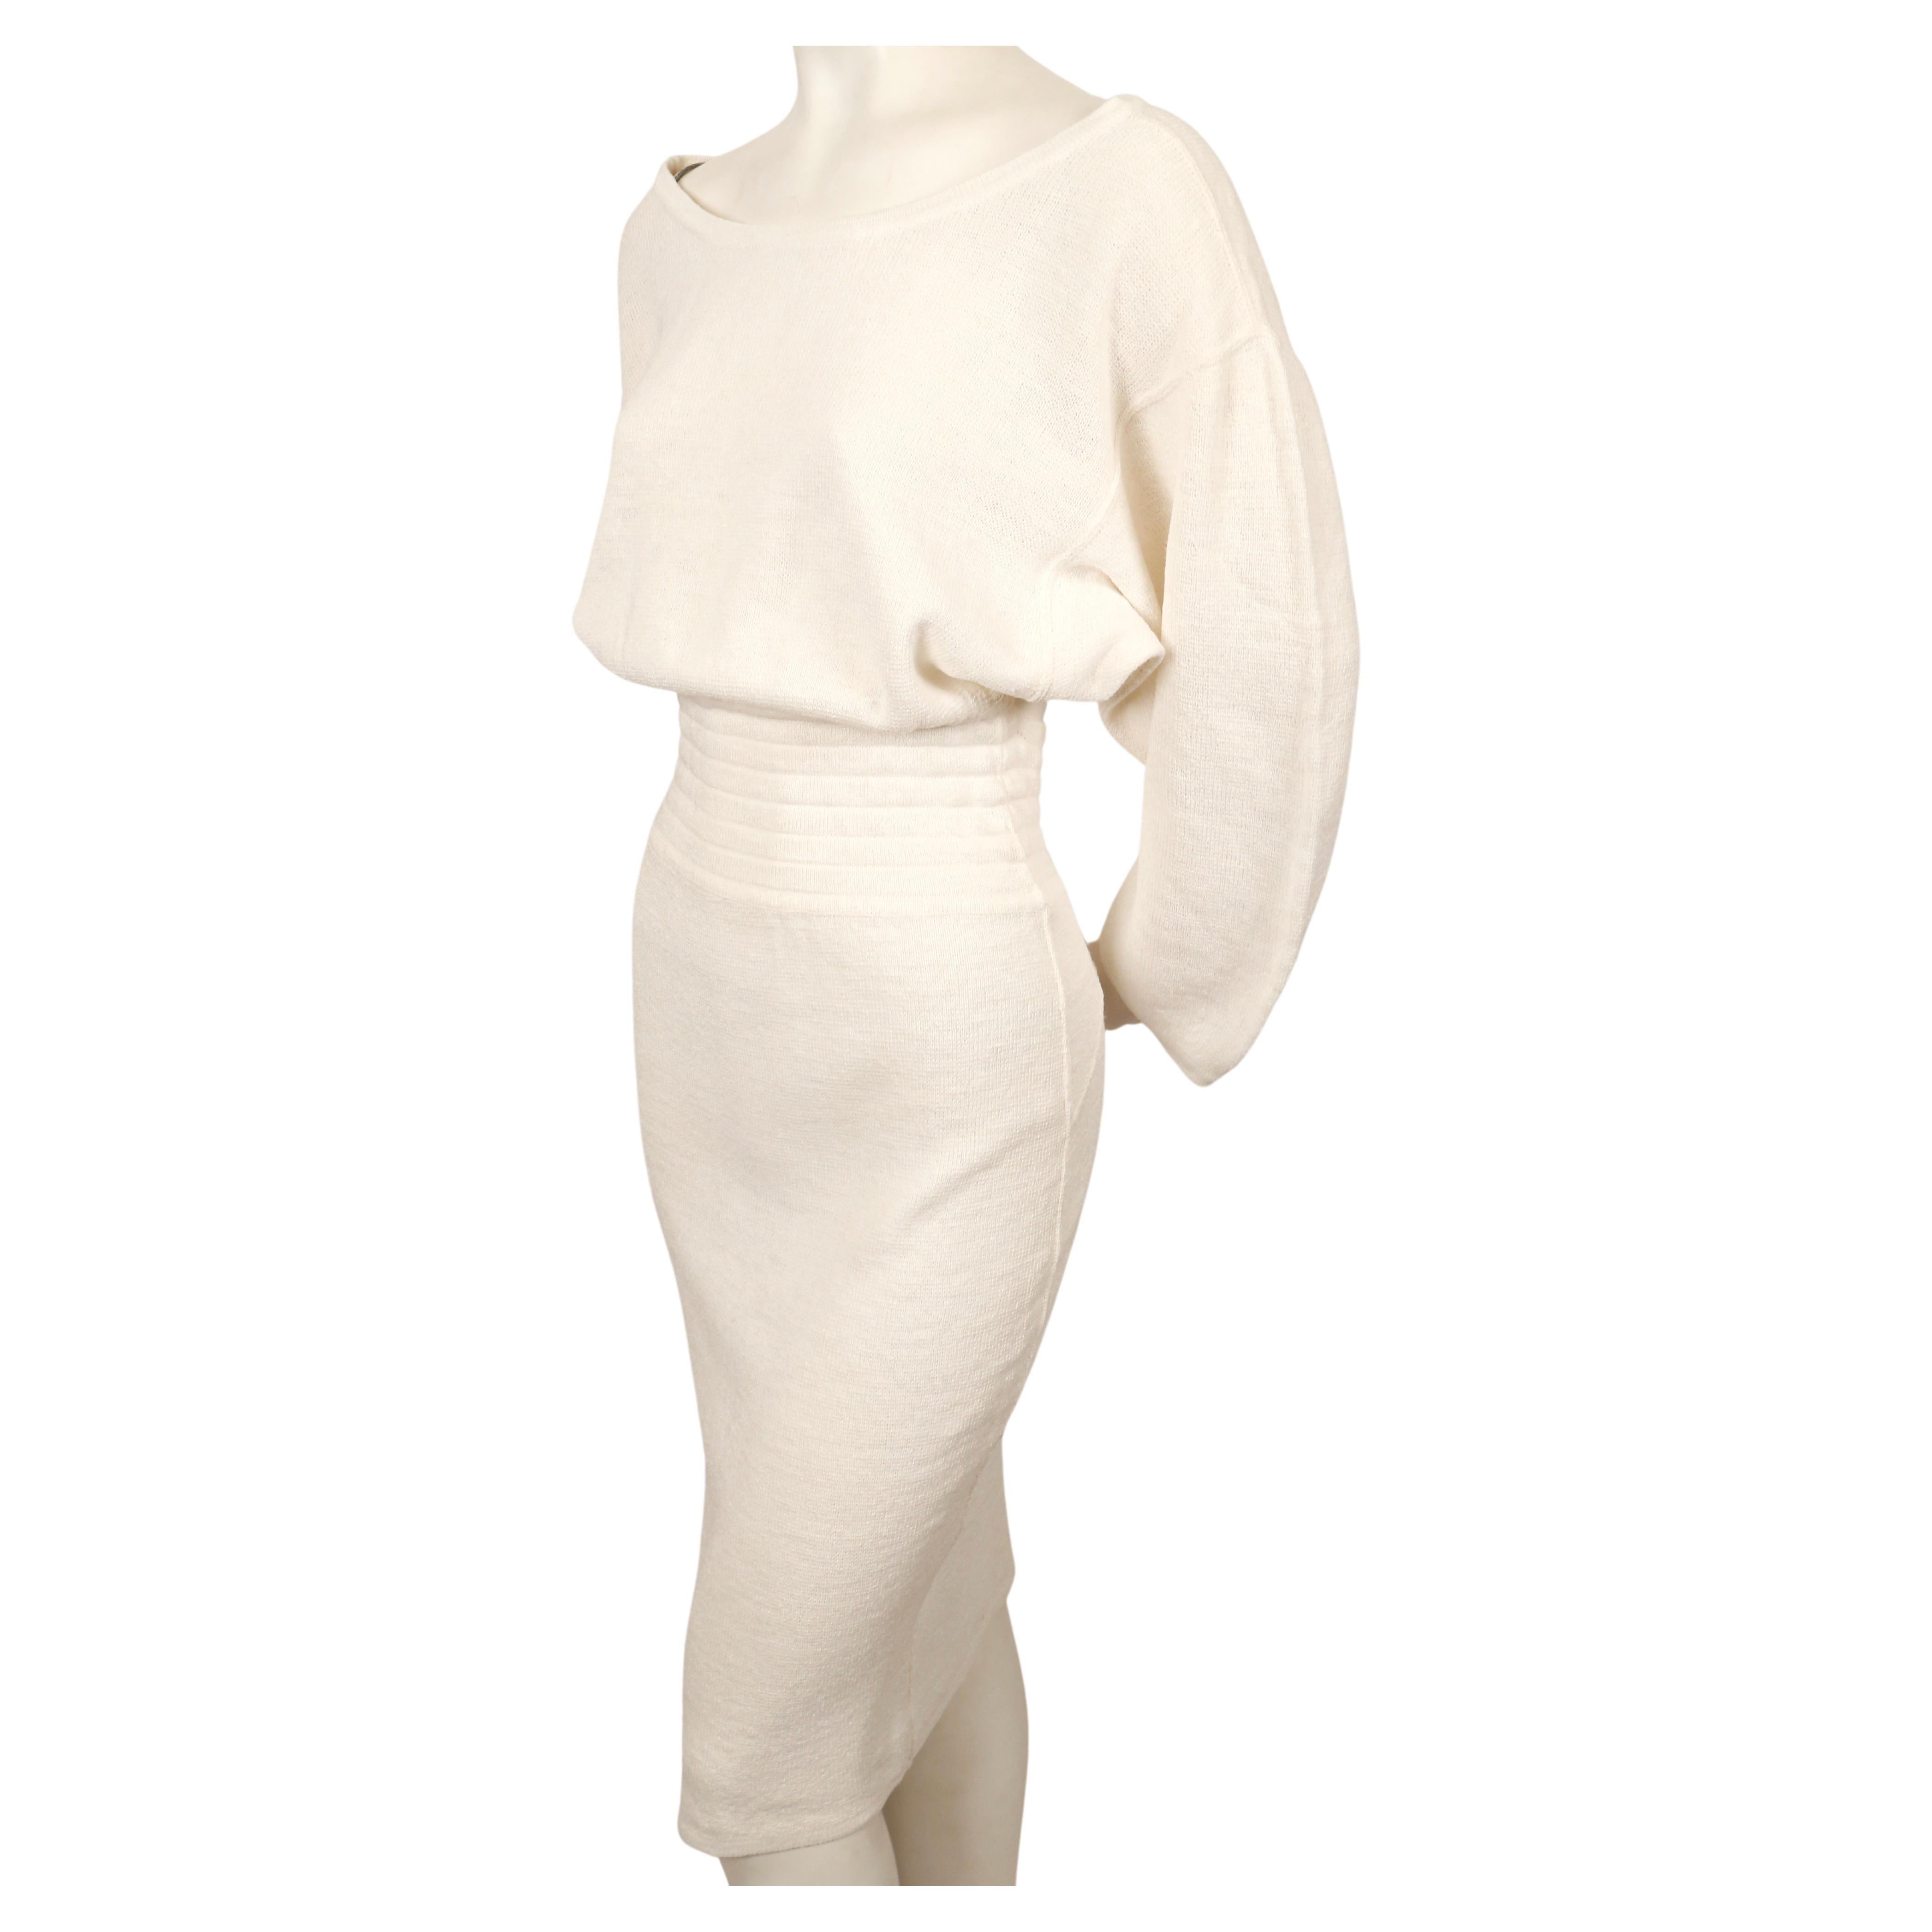 Women's or Men's 1985 AZZEDINE ALAIA linen knit dress with cut out back For Sale